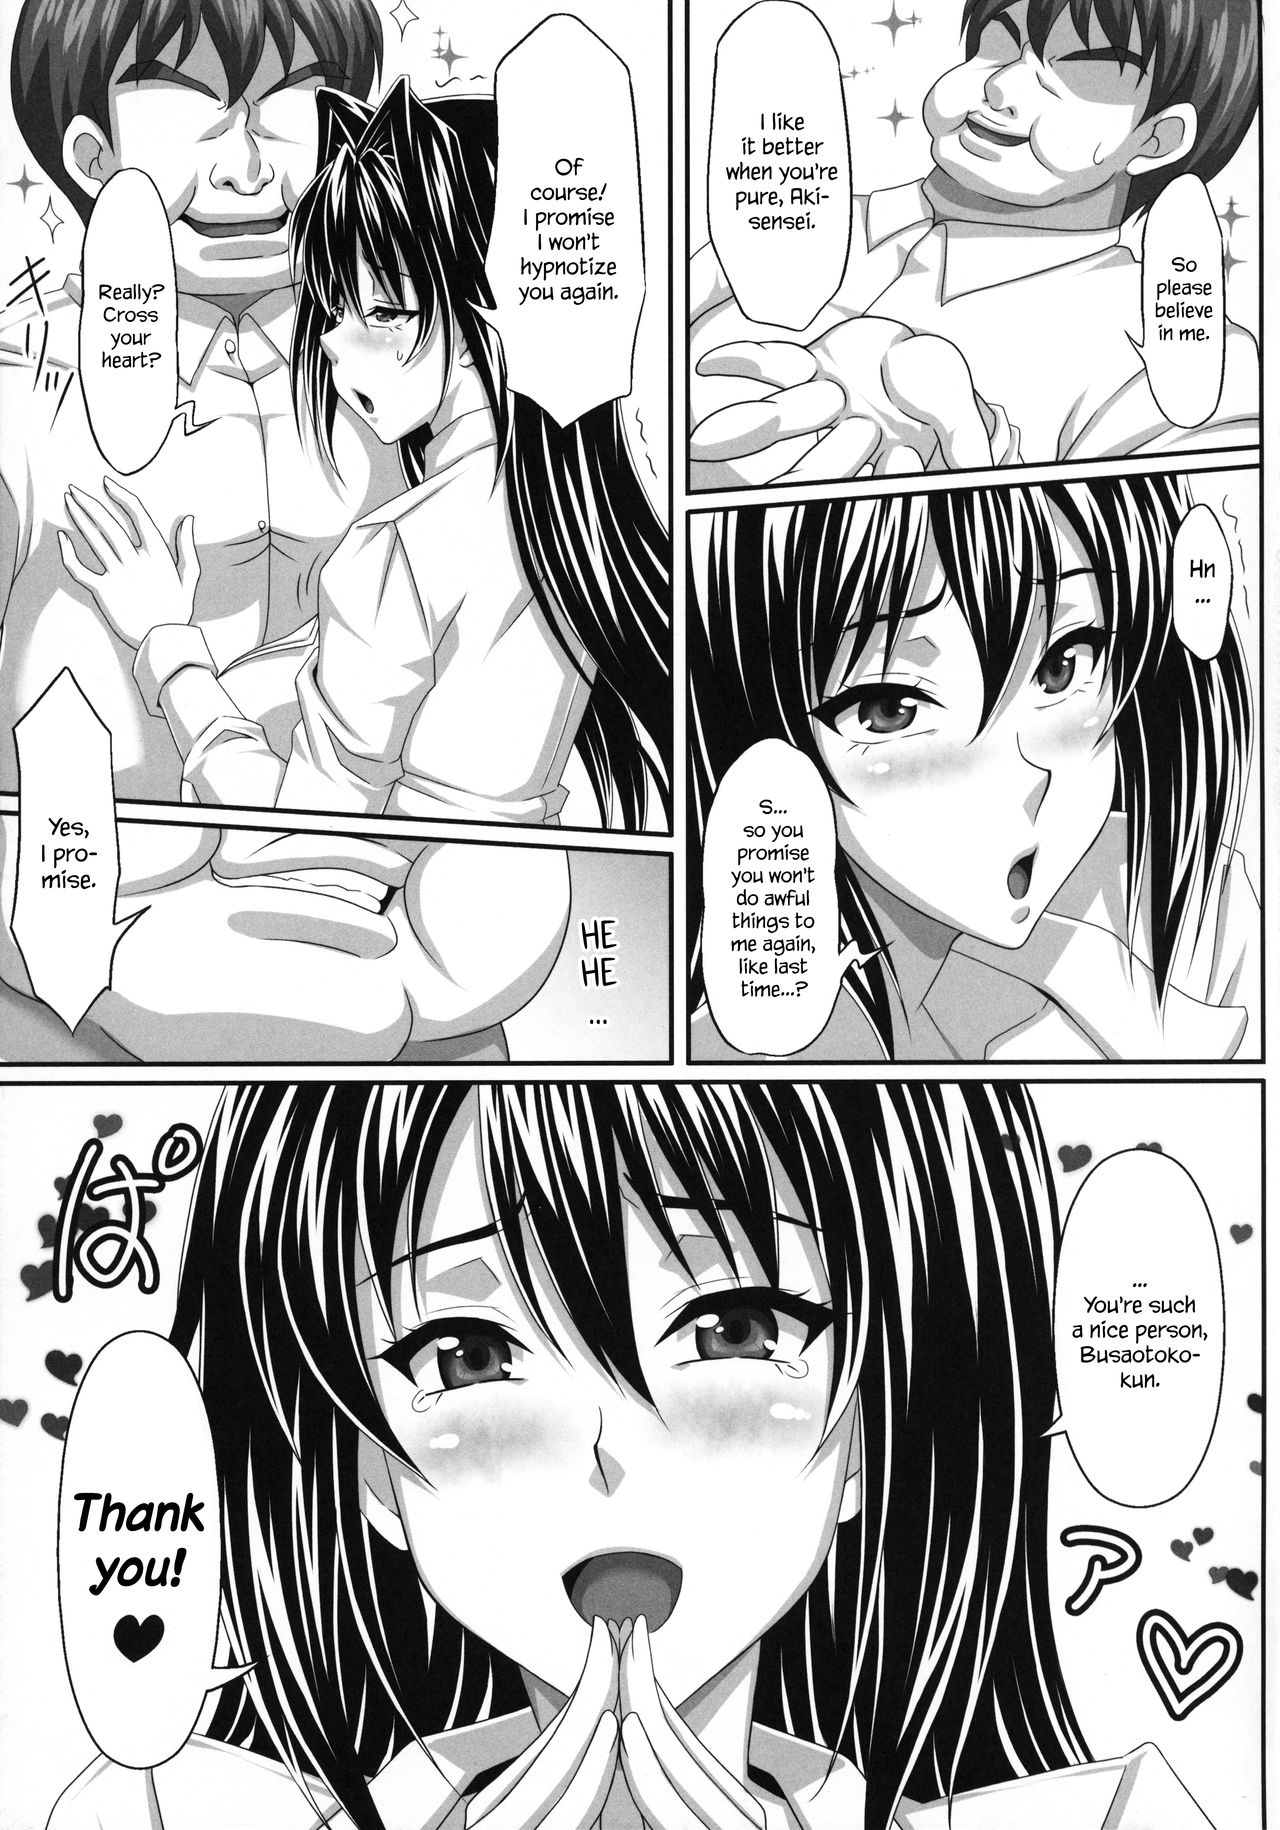 Yespro Please Com - AHEN-KI! 2 - Page 7 - HentaiRox